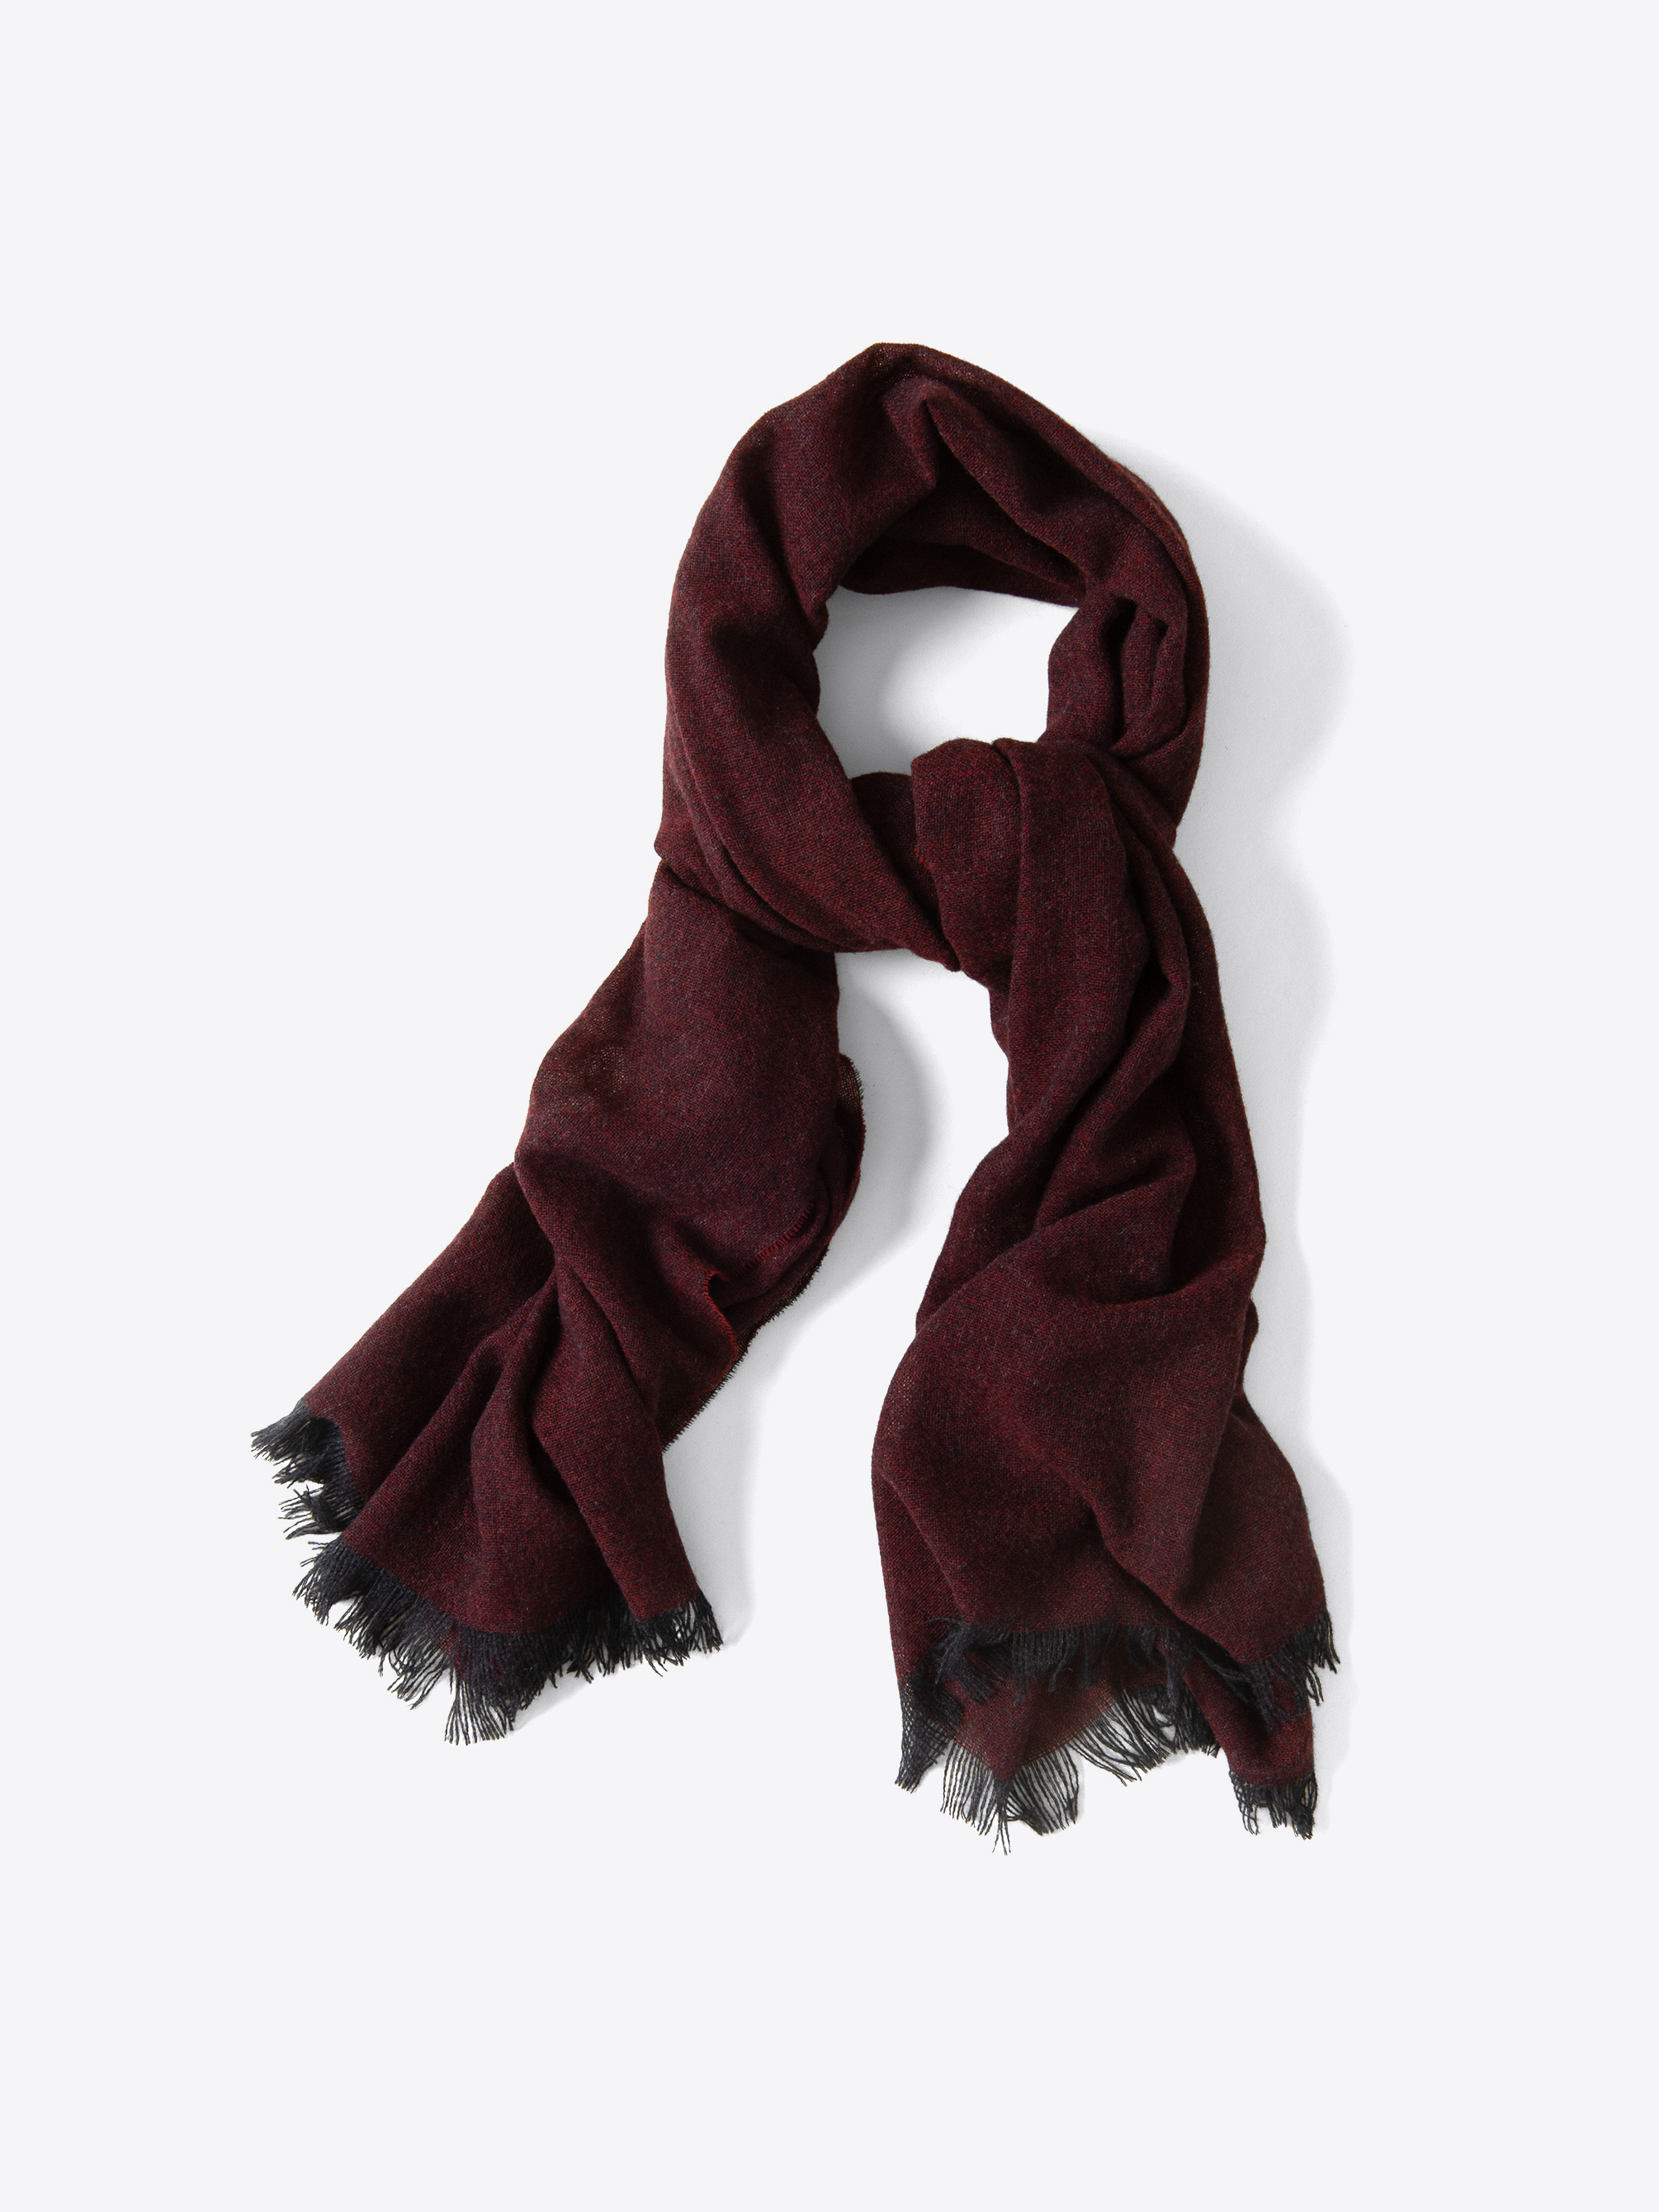 Zoom Image of Burgundy Cashmere Scarf